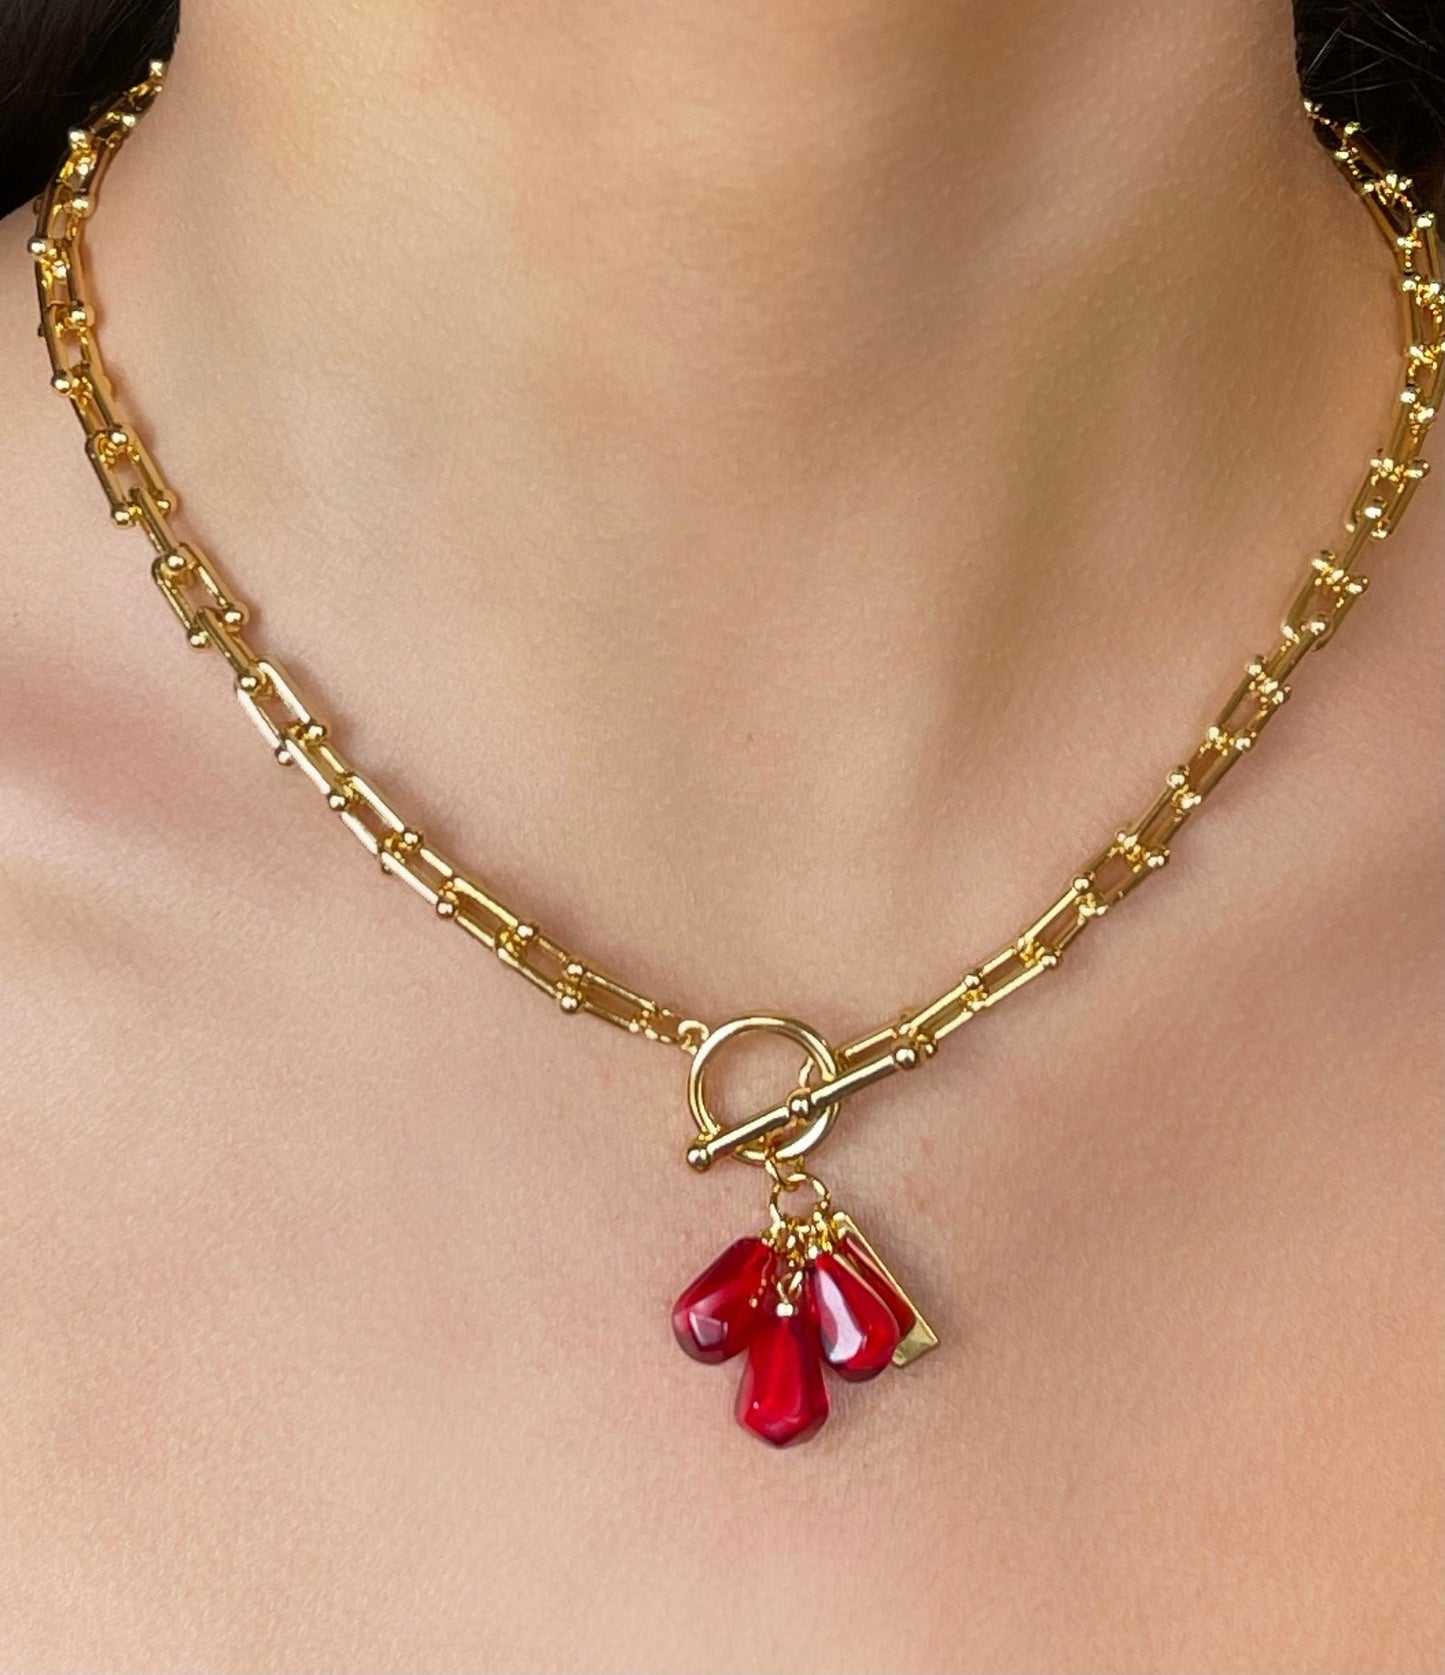 Pomegranate Seeds Necklace in Gold and Red